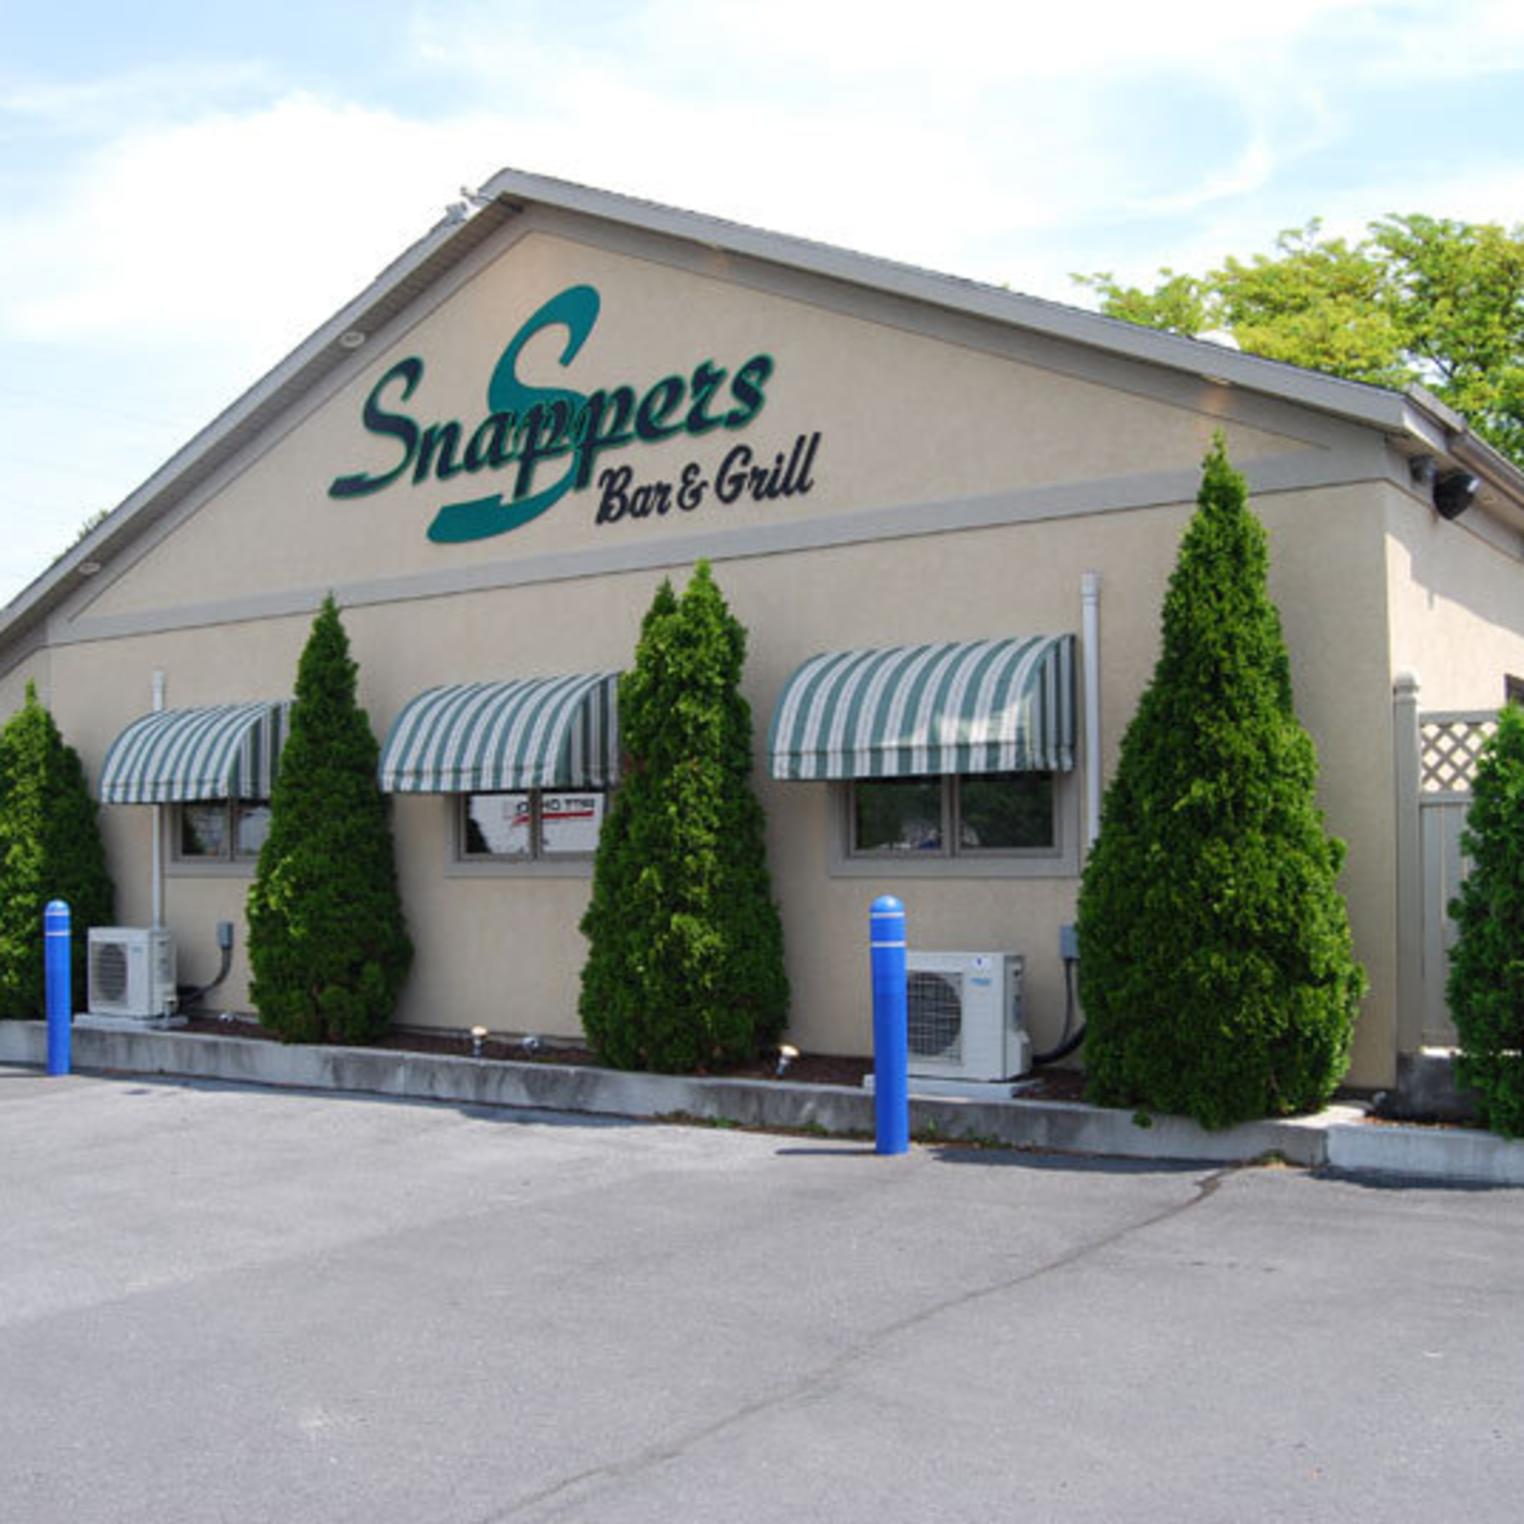 Snapper's Bar and Grill